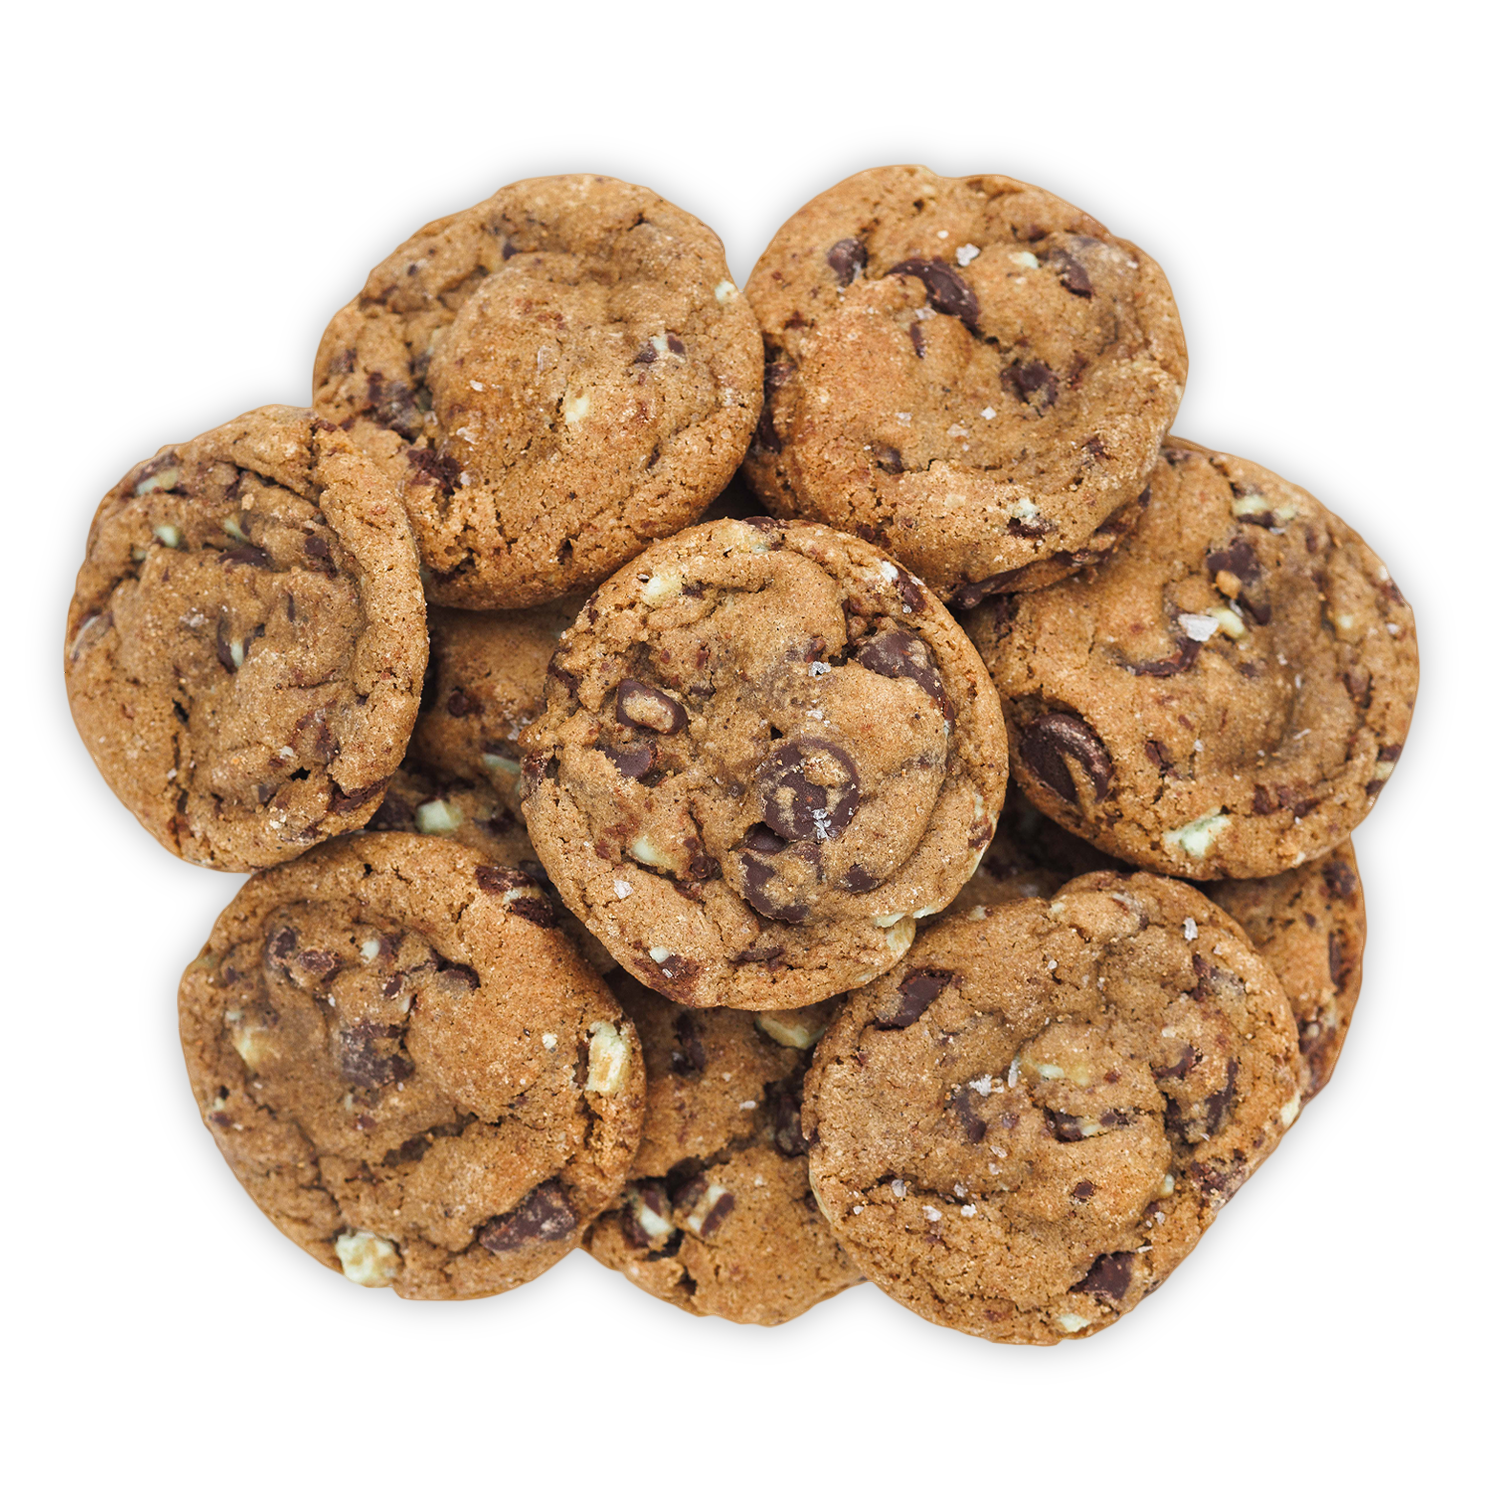 Mini_Mint_Chocolate_Chip_Cookies_with_Andes_Mints_jpg.png